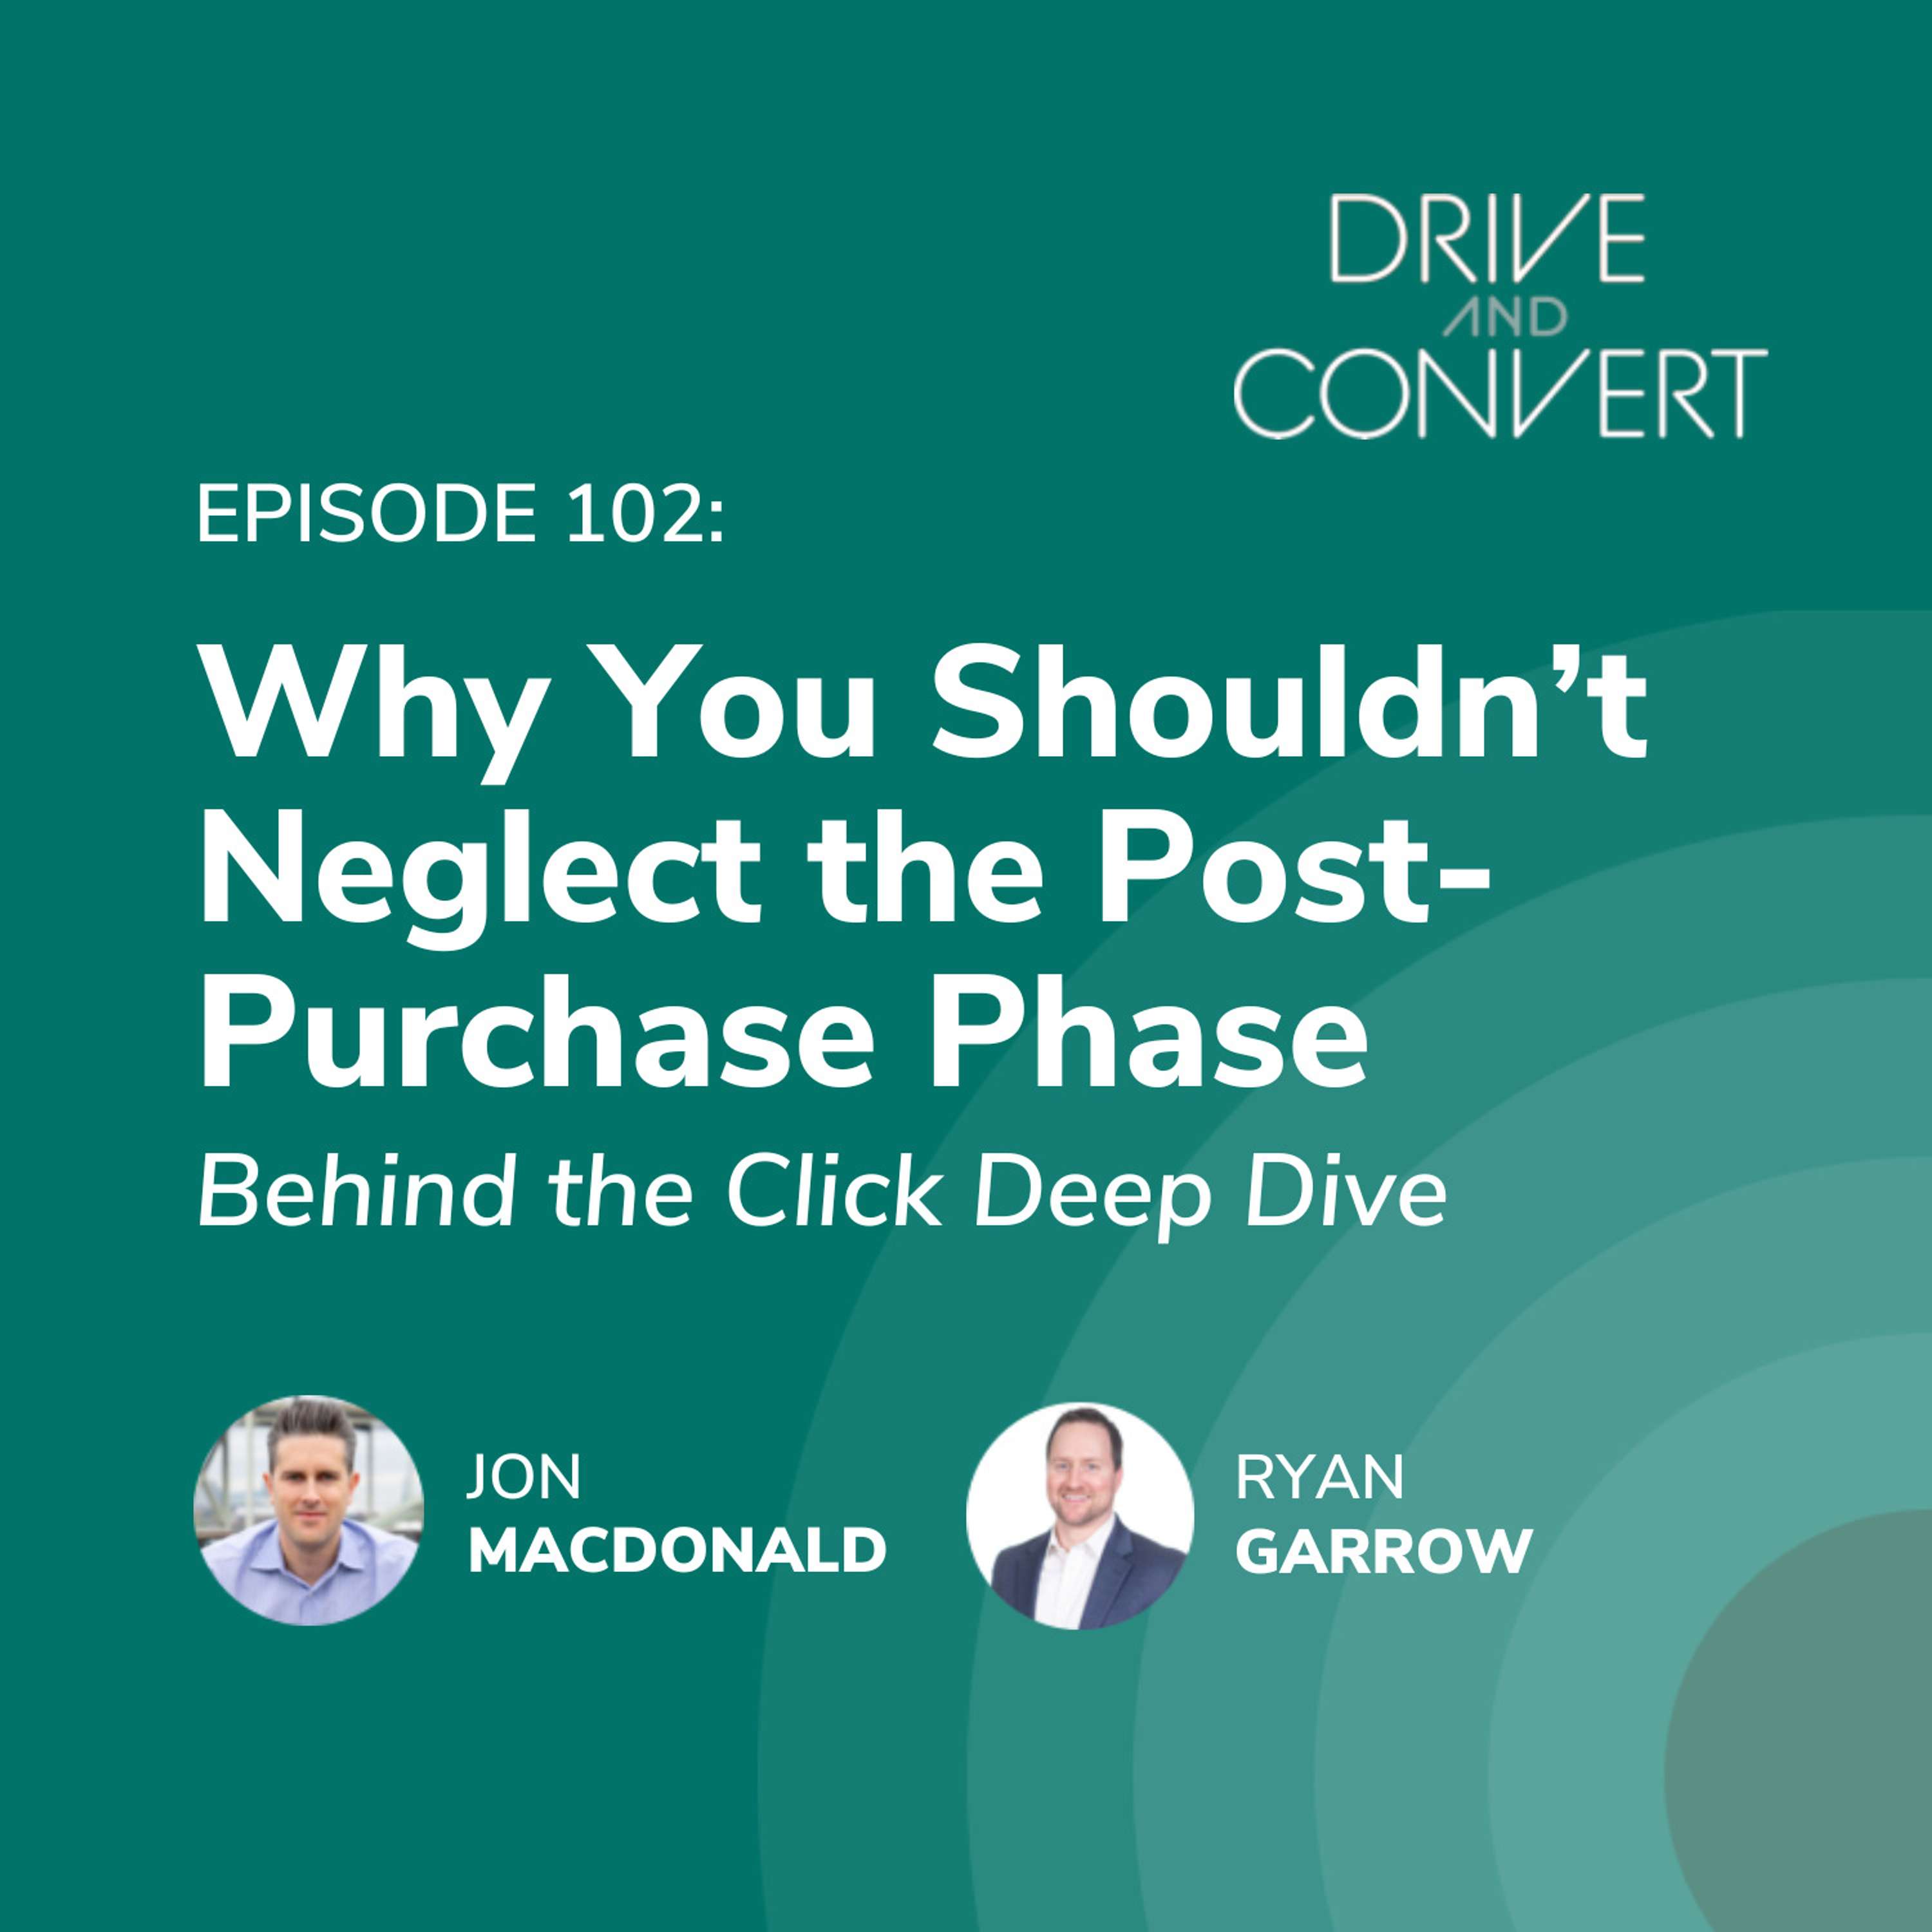 Episode 102: Why You Shouldn’t Neglect the Post-Purchase Phase - Behind the Click Deep Dive